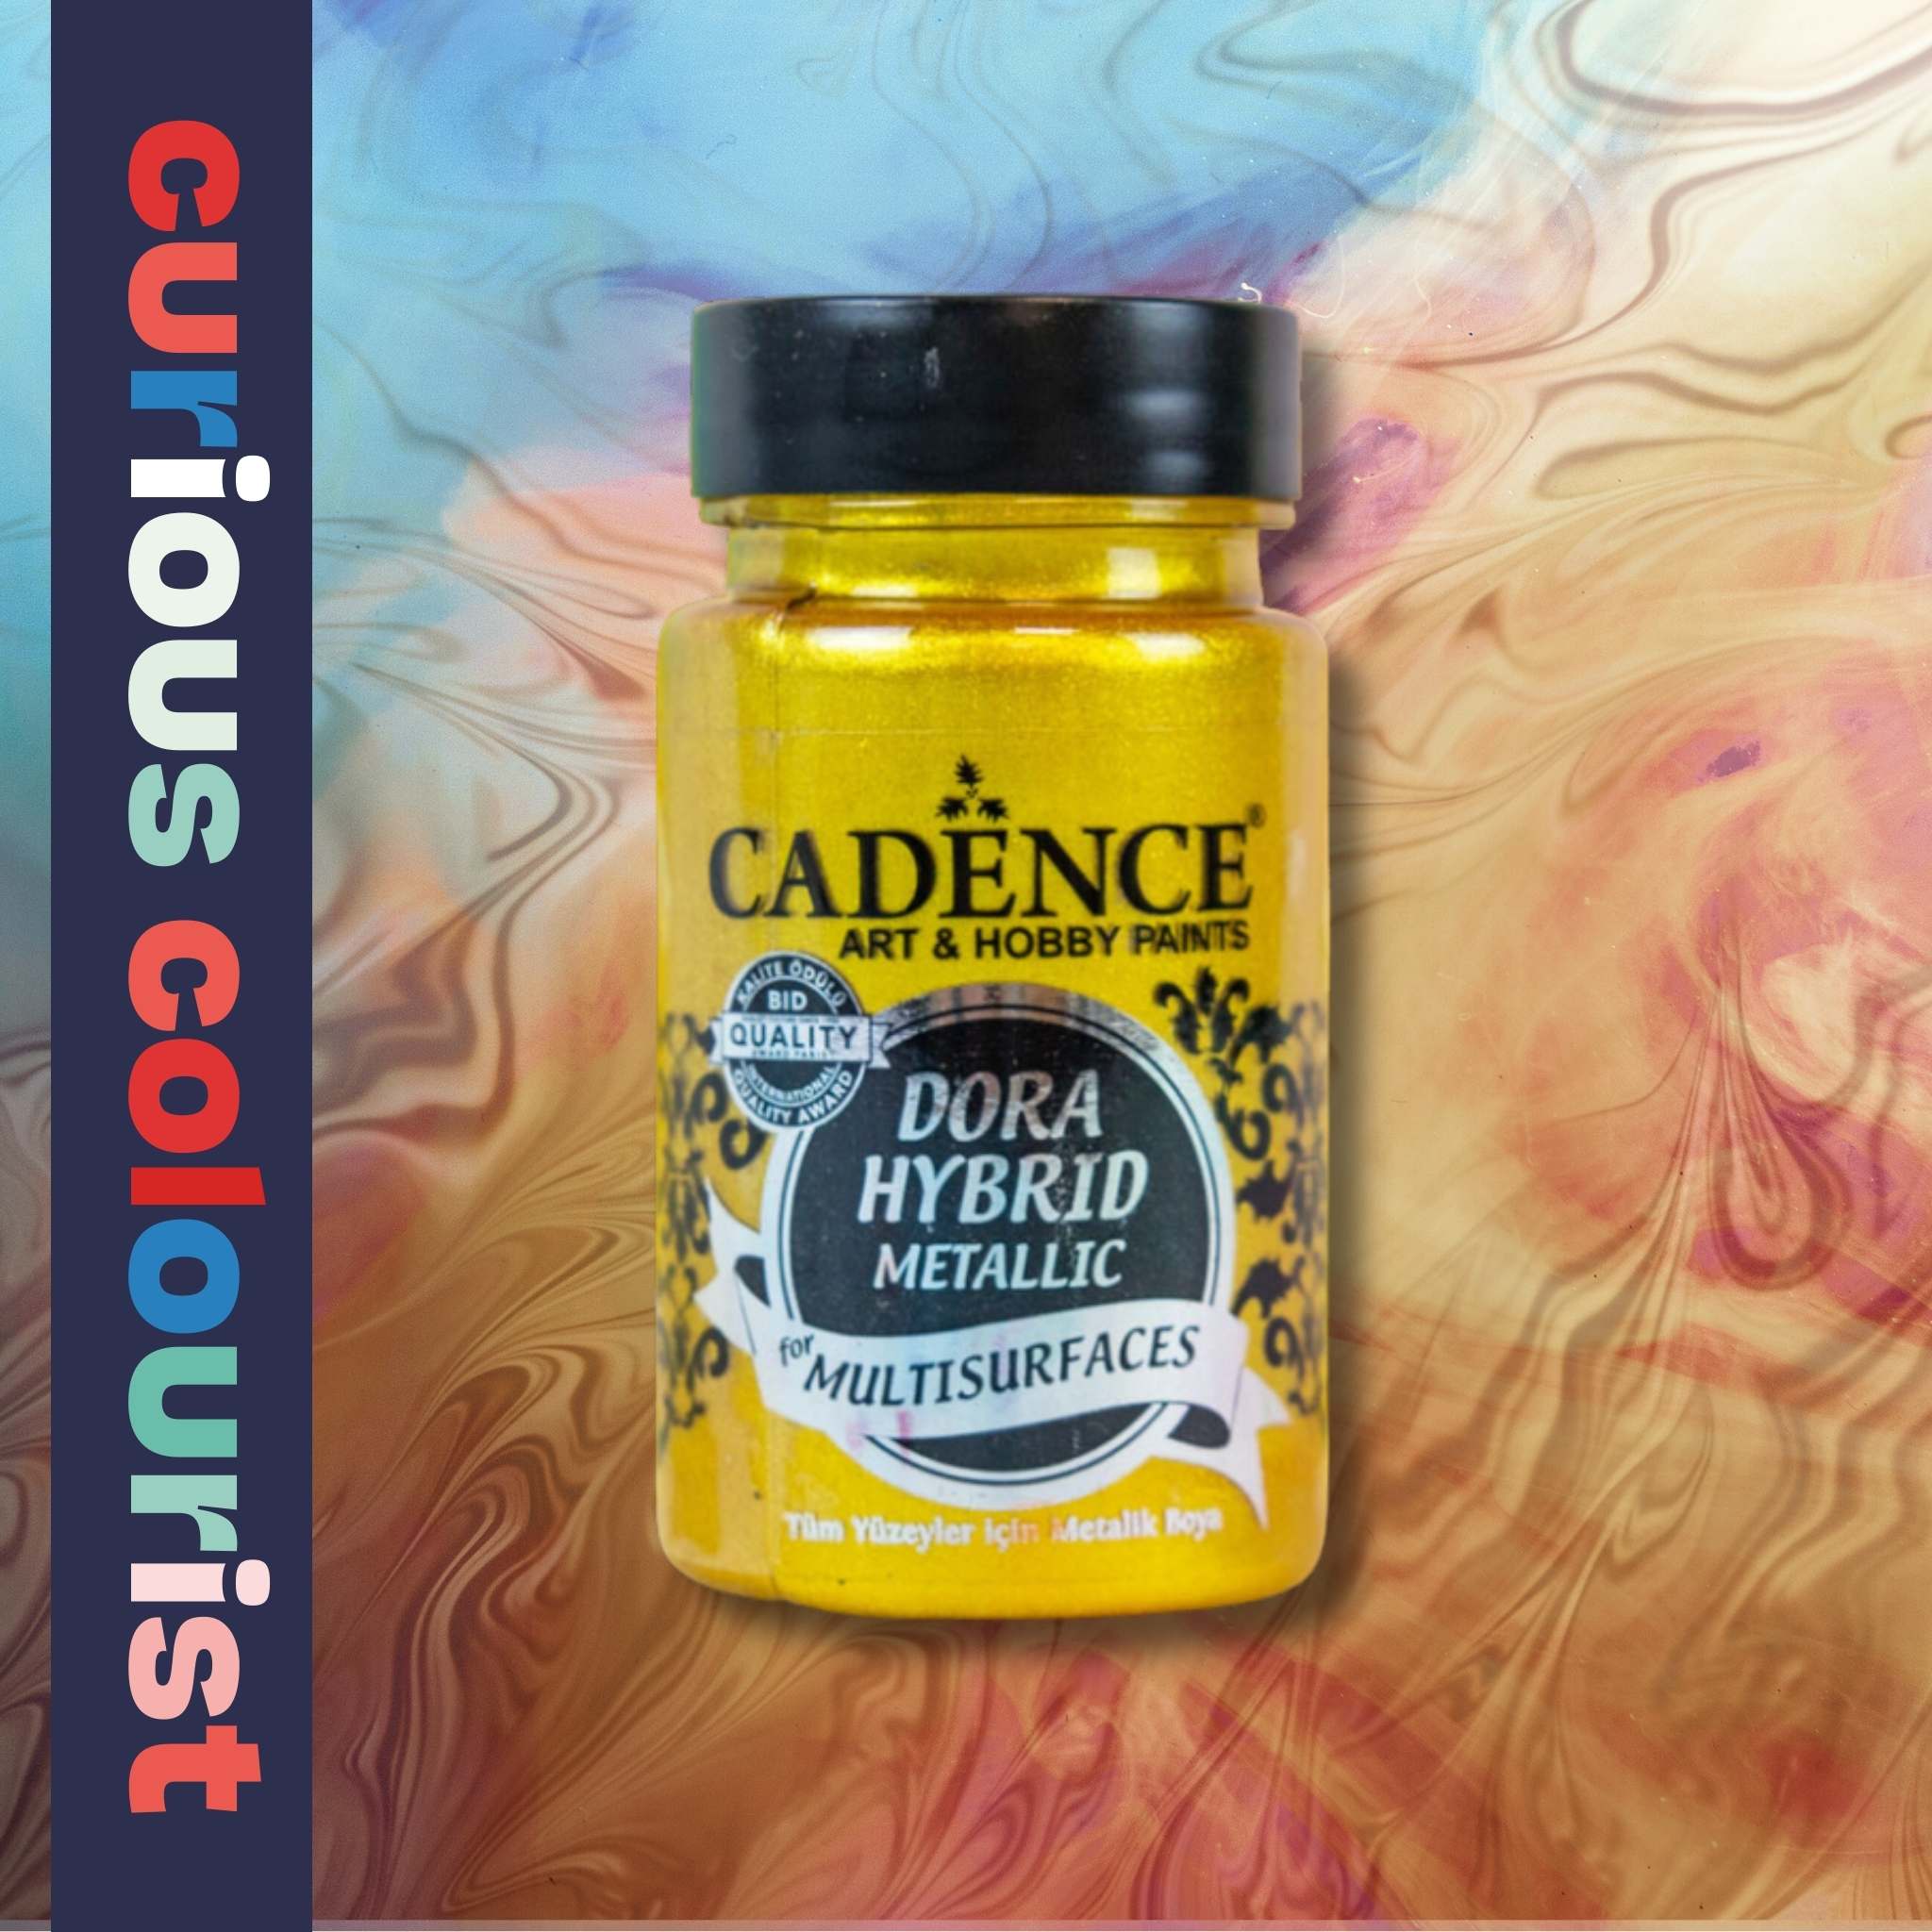 Gold two tone metallic paint from Cadence that will give your leather craft projects a glitter and shine - use to as paint effects, re-colour or personalise your leather shoes or bags.